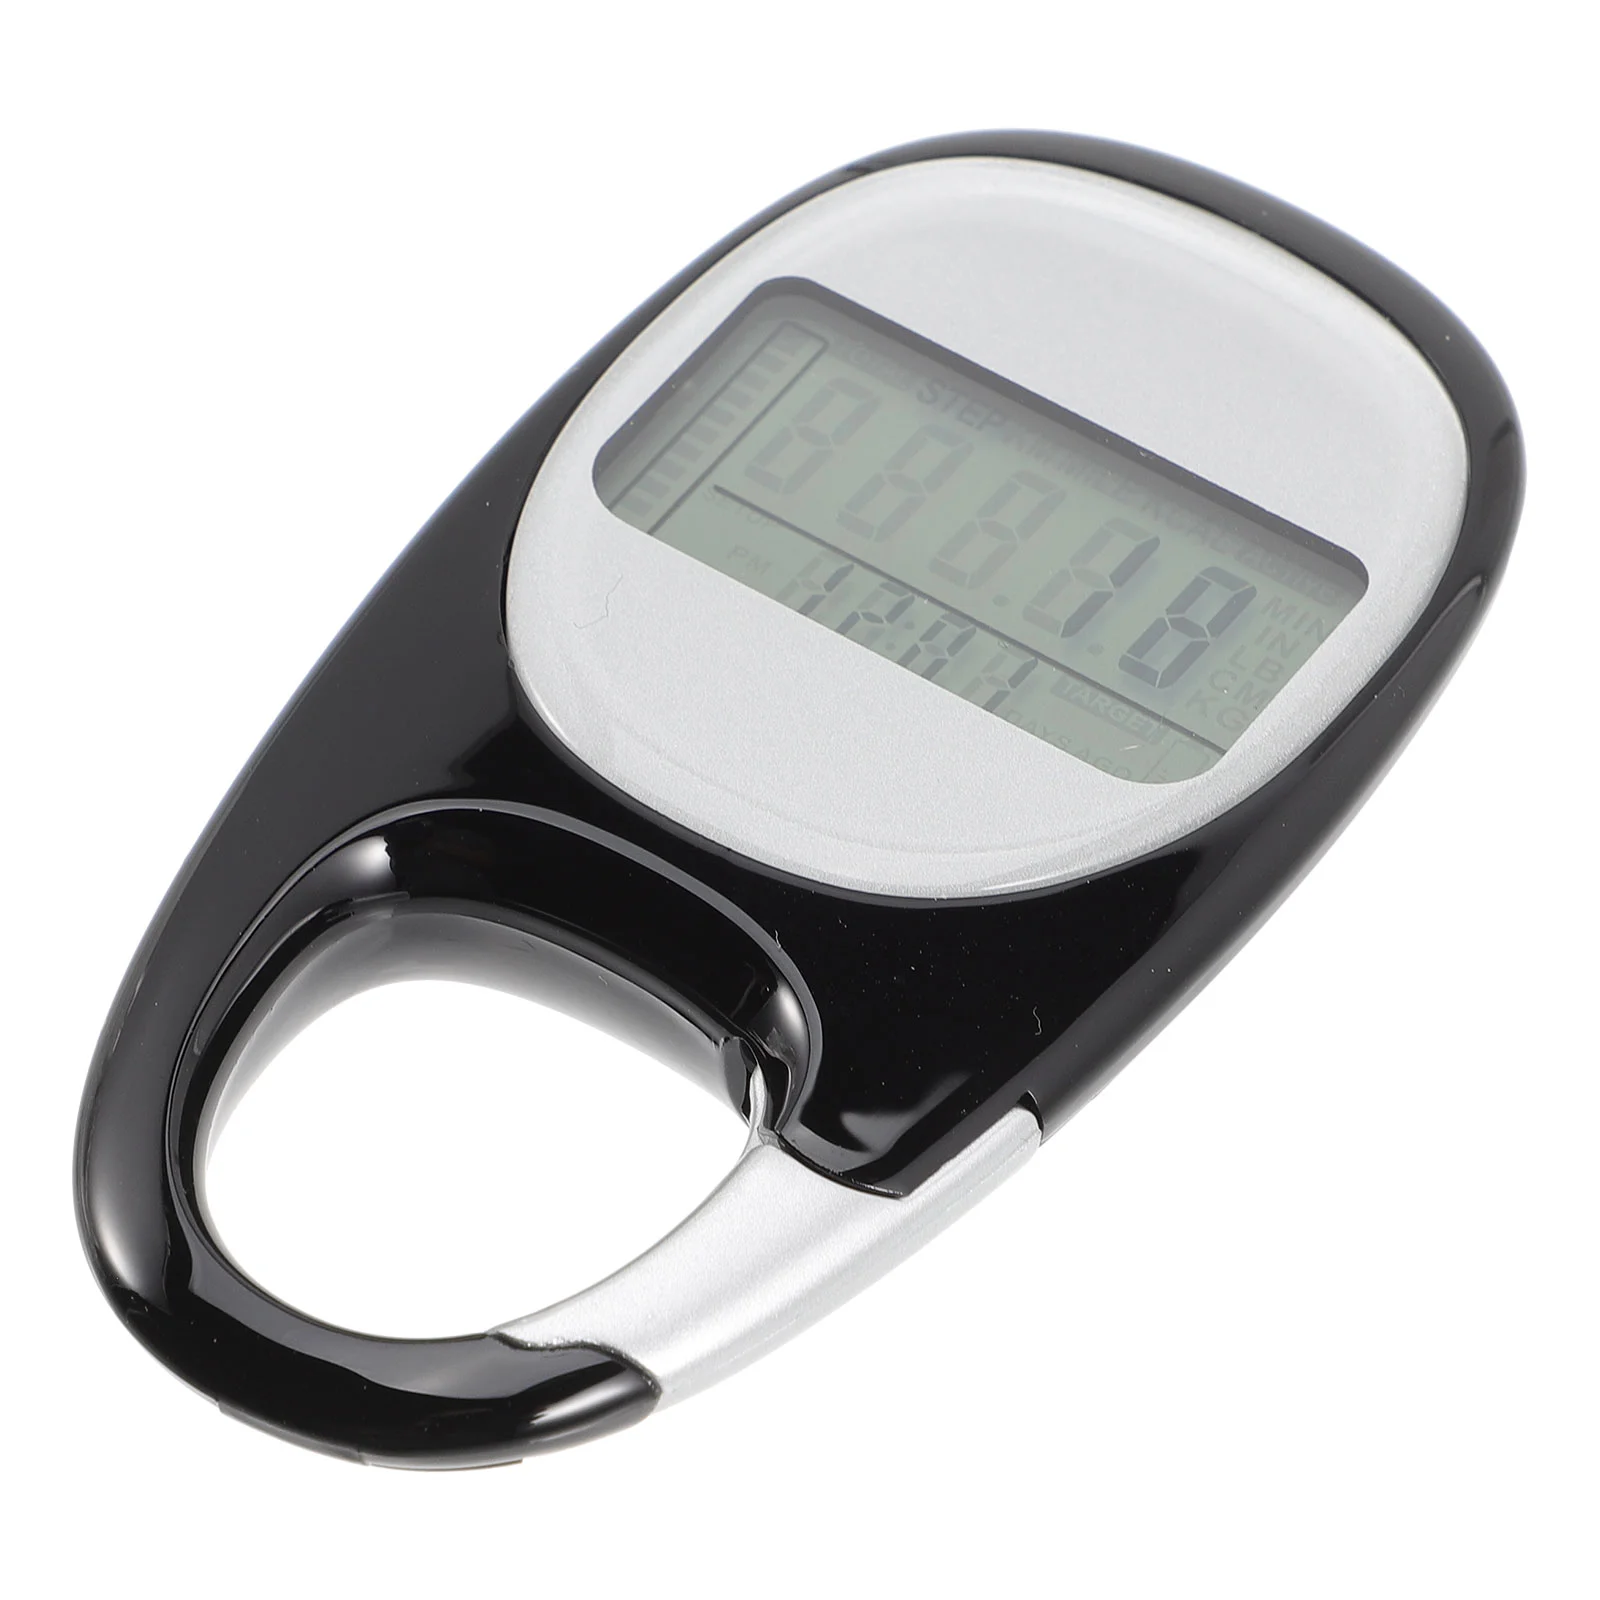 

3d Pedometer Professional Multifunctional Walking Counter Climbing Passometer Outdoor Creative Step Convenient